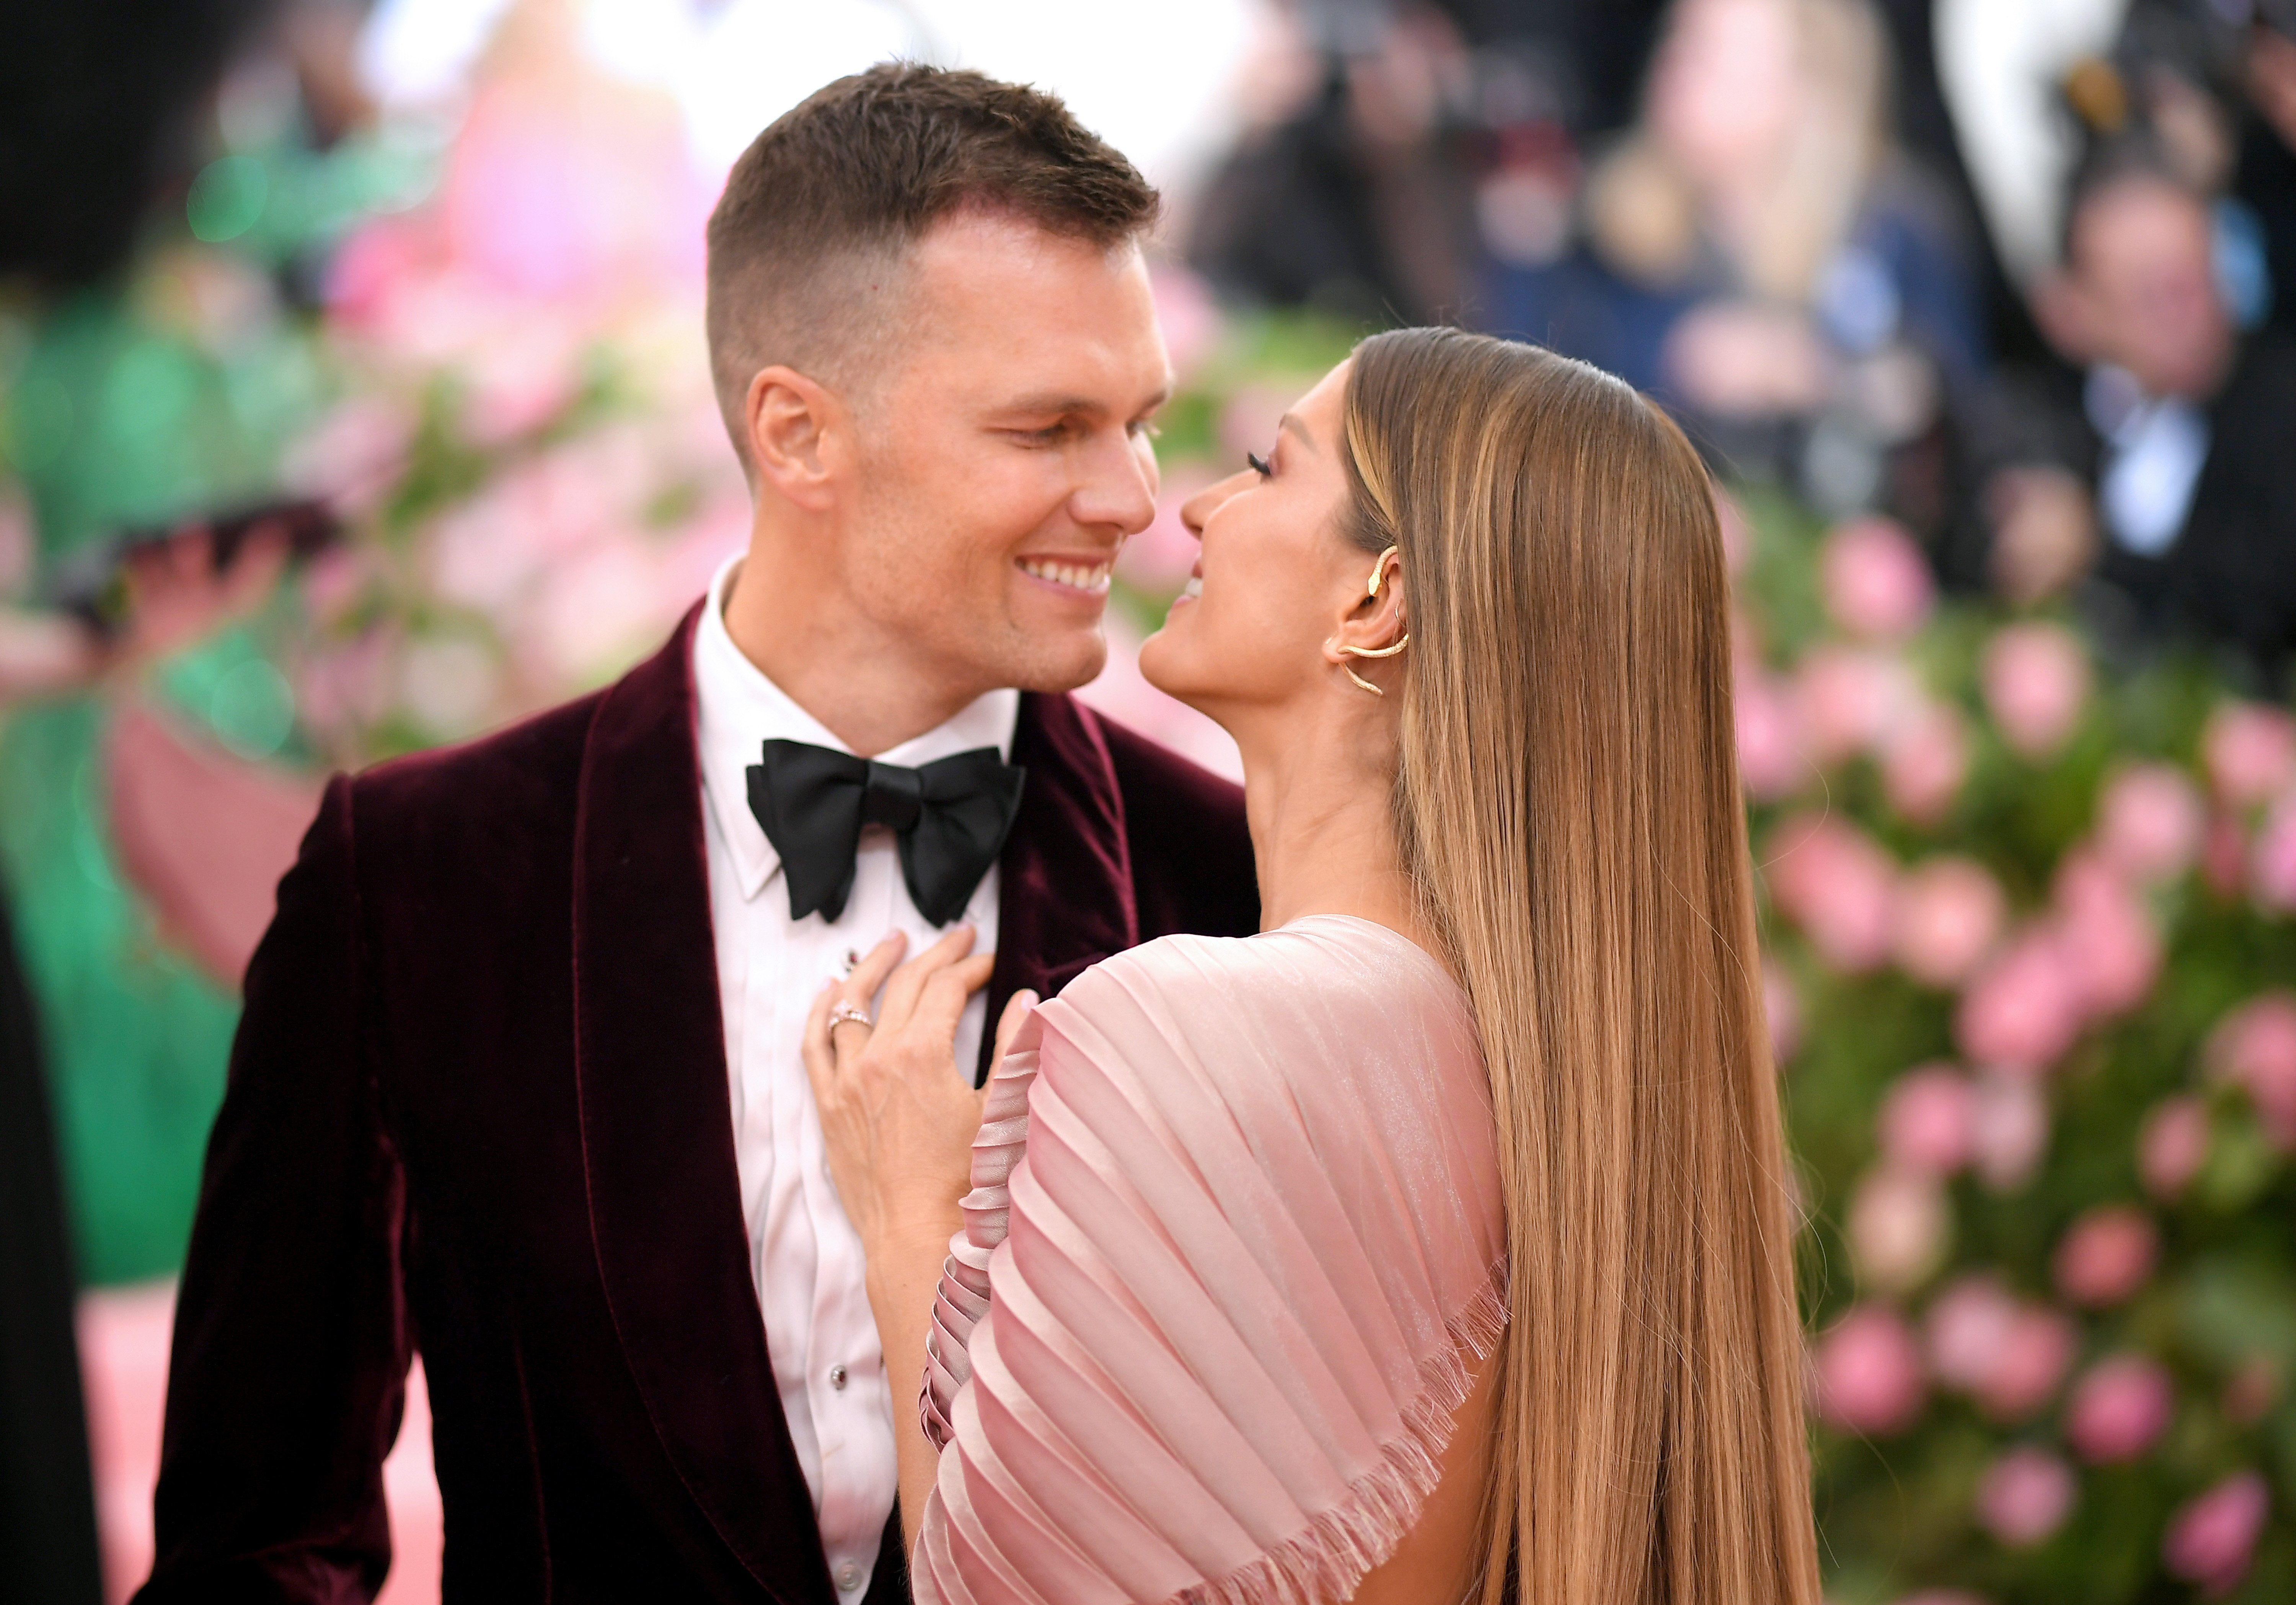 Tom Brady and his wife Gisele Bundchen attend the 2019 Met Gala | Photo: Getty Images